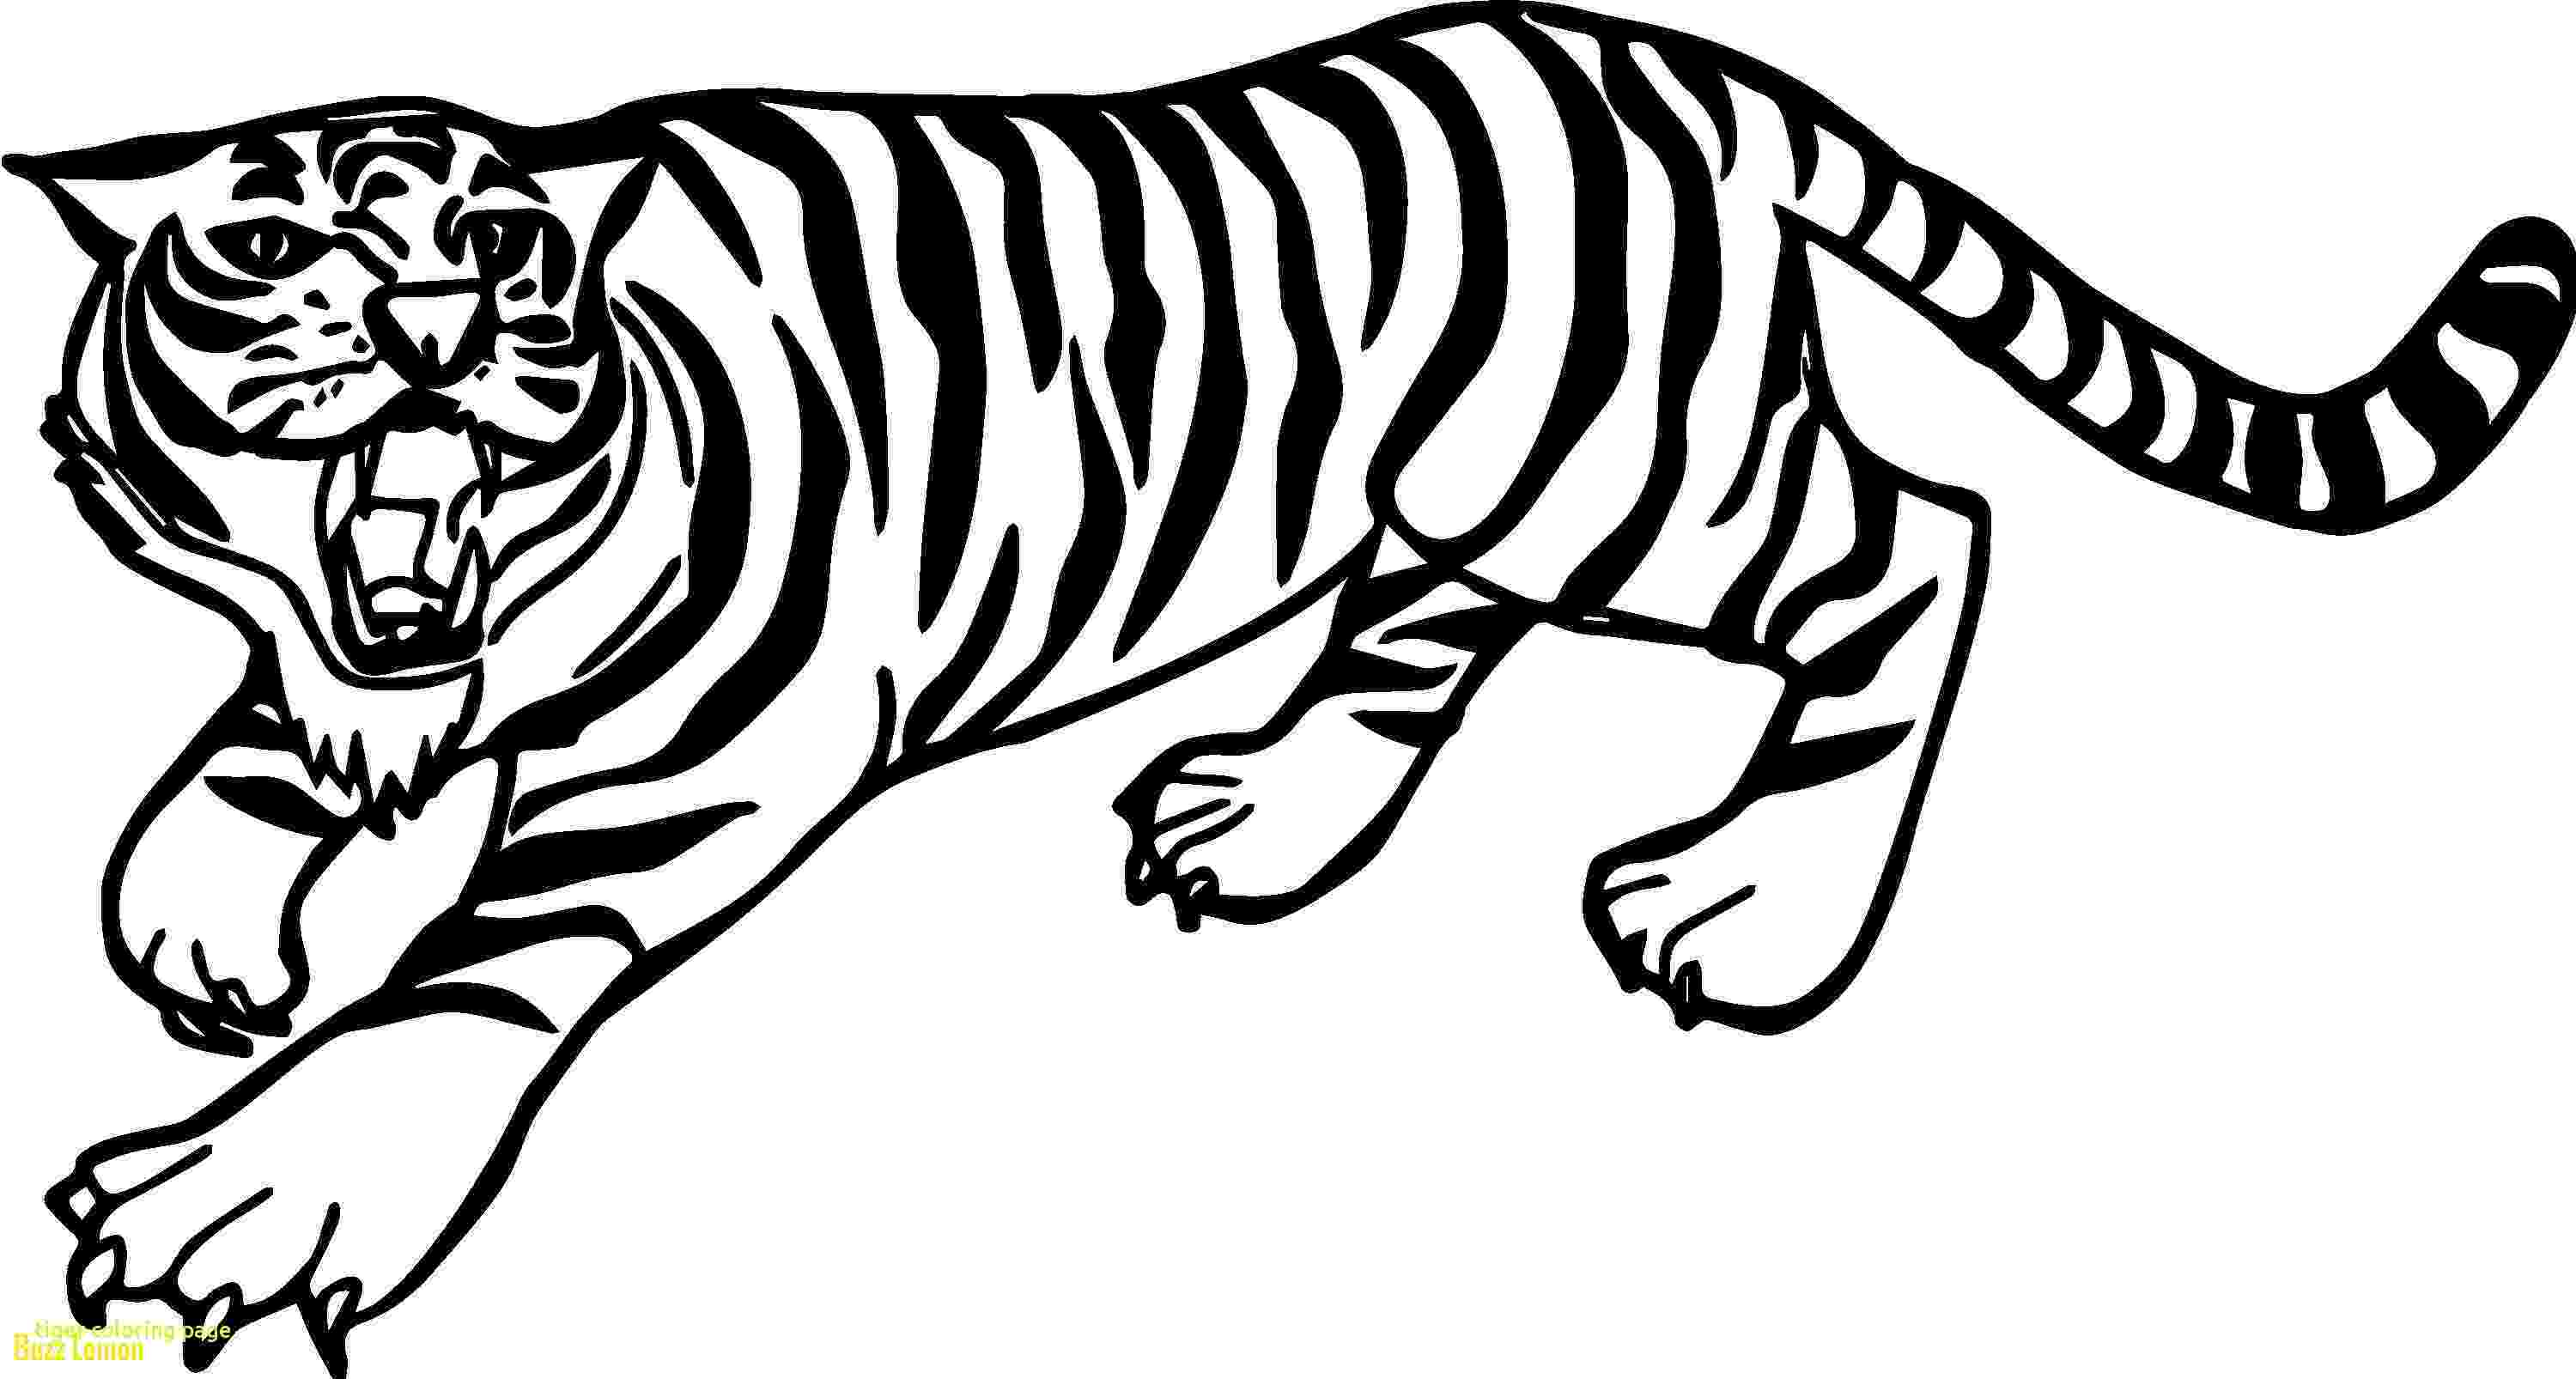 siberian tiger coloring page an illustration of siberian tiger on a prairie coloring coloring siberian tiger page 